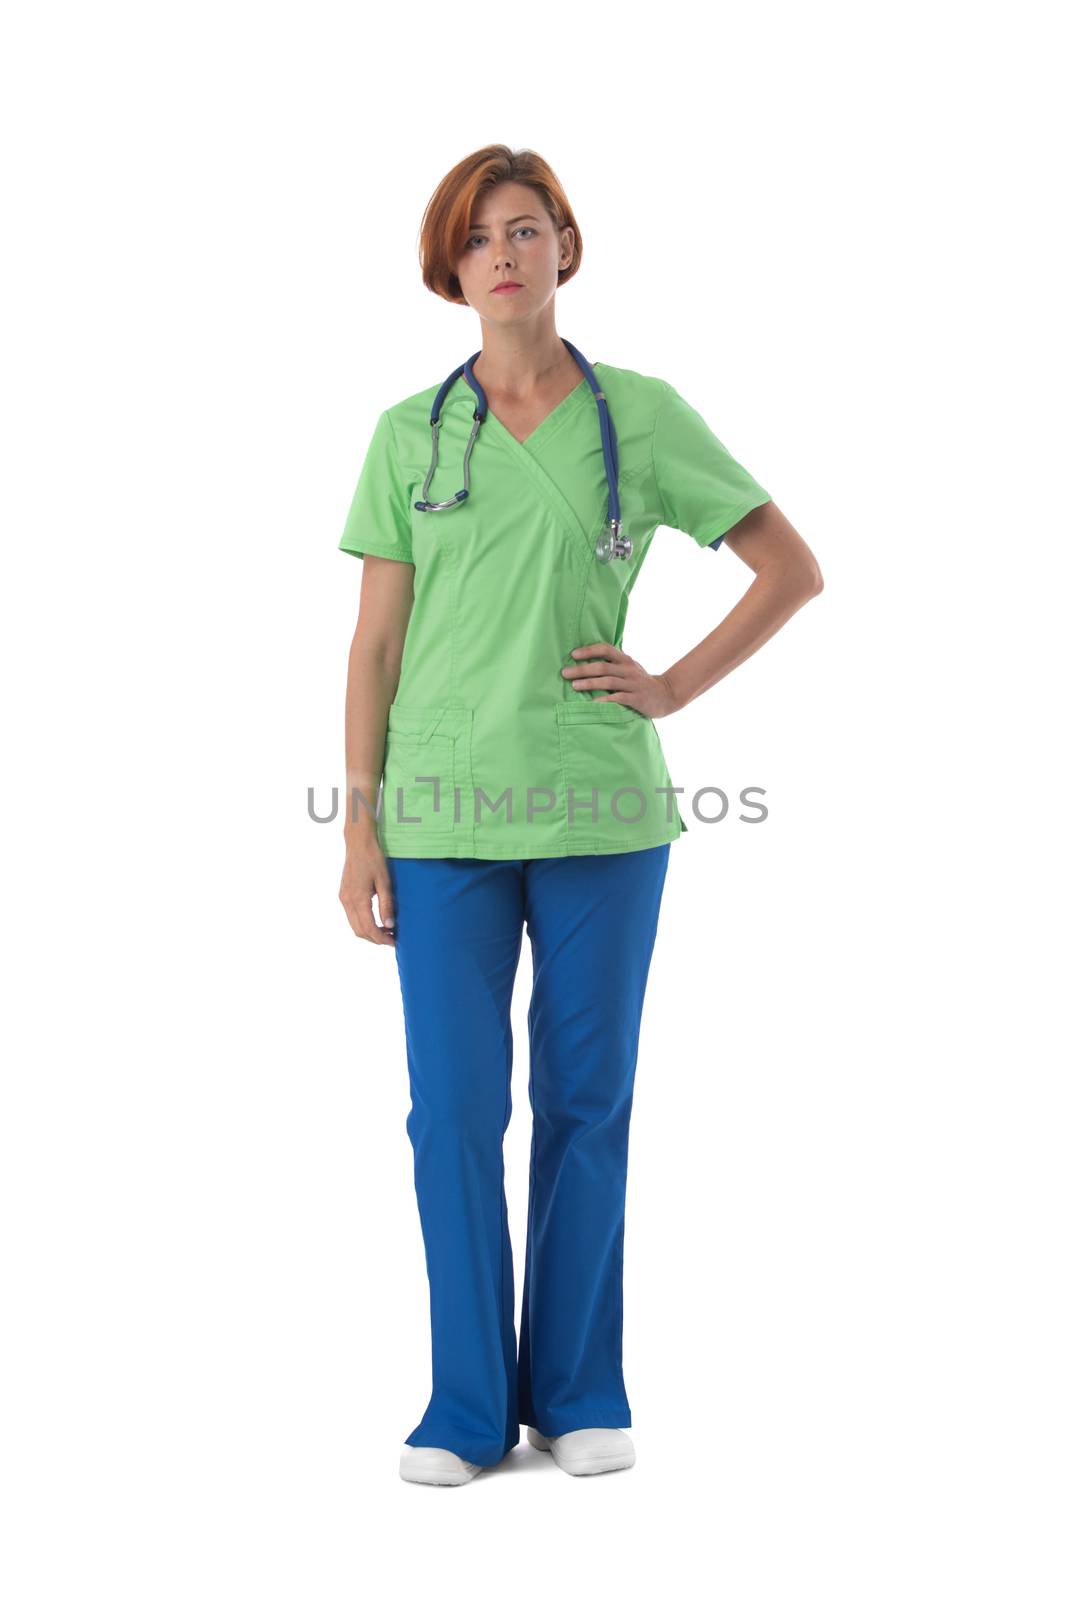 Female nurse in blue and green uniform with stethoscope and document folder isolated on white background, full length portrait